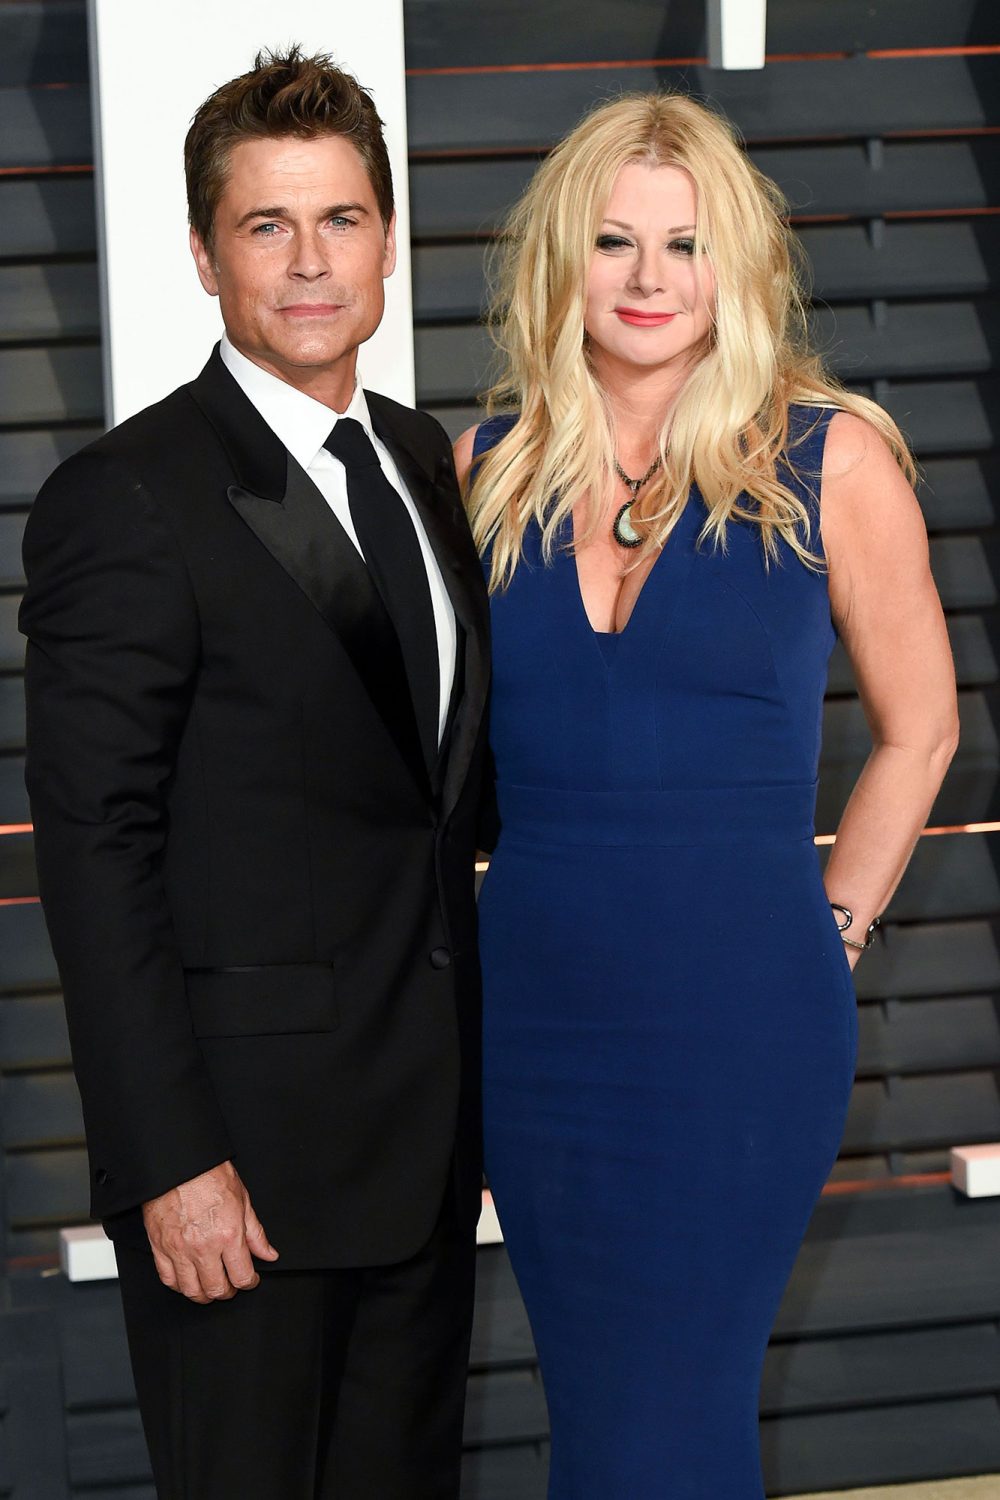 Rob Lowe Shares What's in His Kitchen